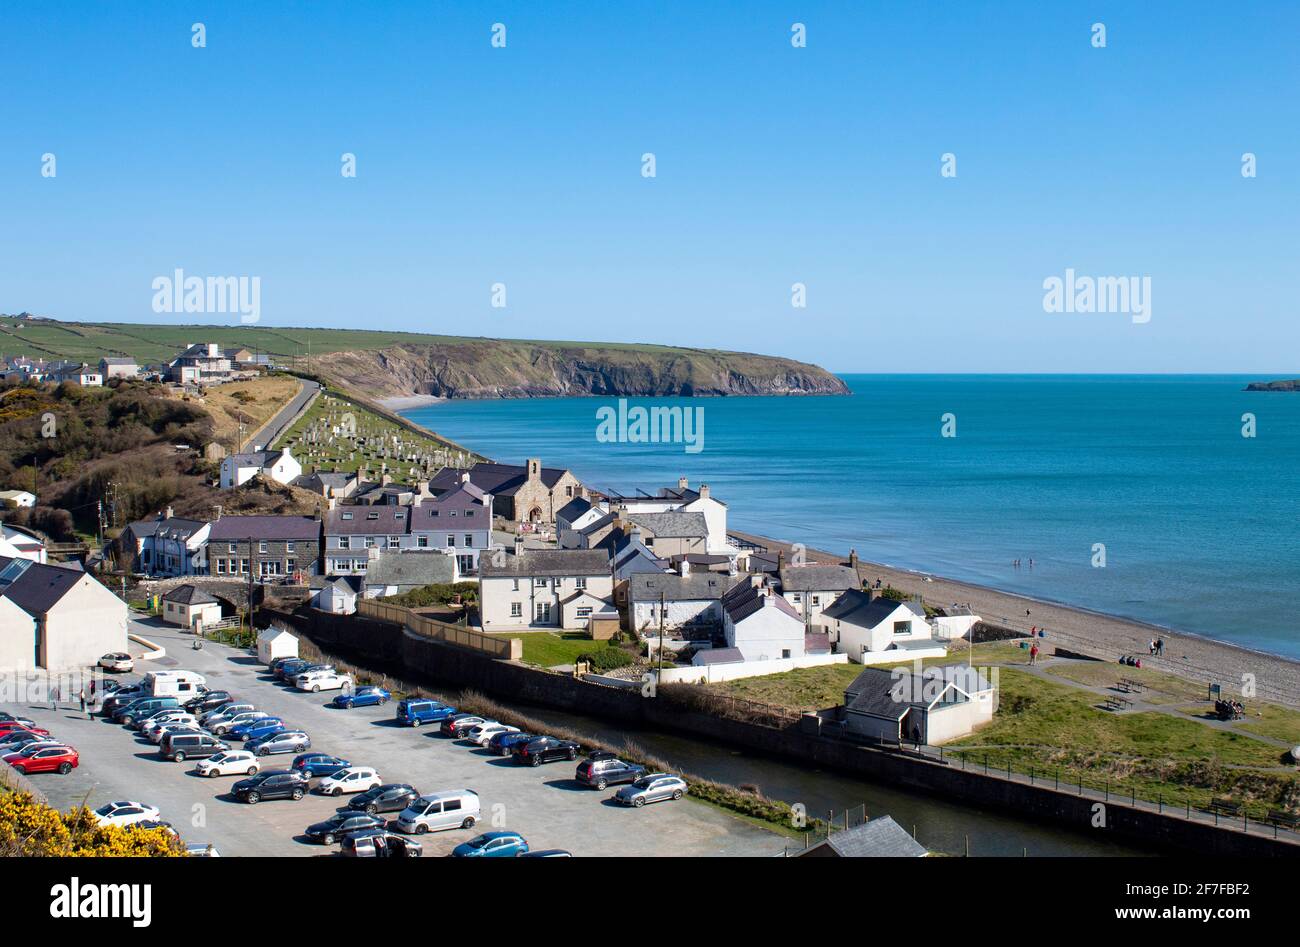 Aberdaron, Wales. Llyn Peninsula. Landscape view of the pretty bay with beach and cliffs.  High angle view with copy space. Stock Photo